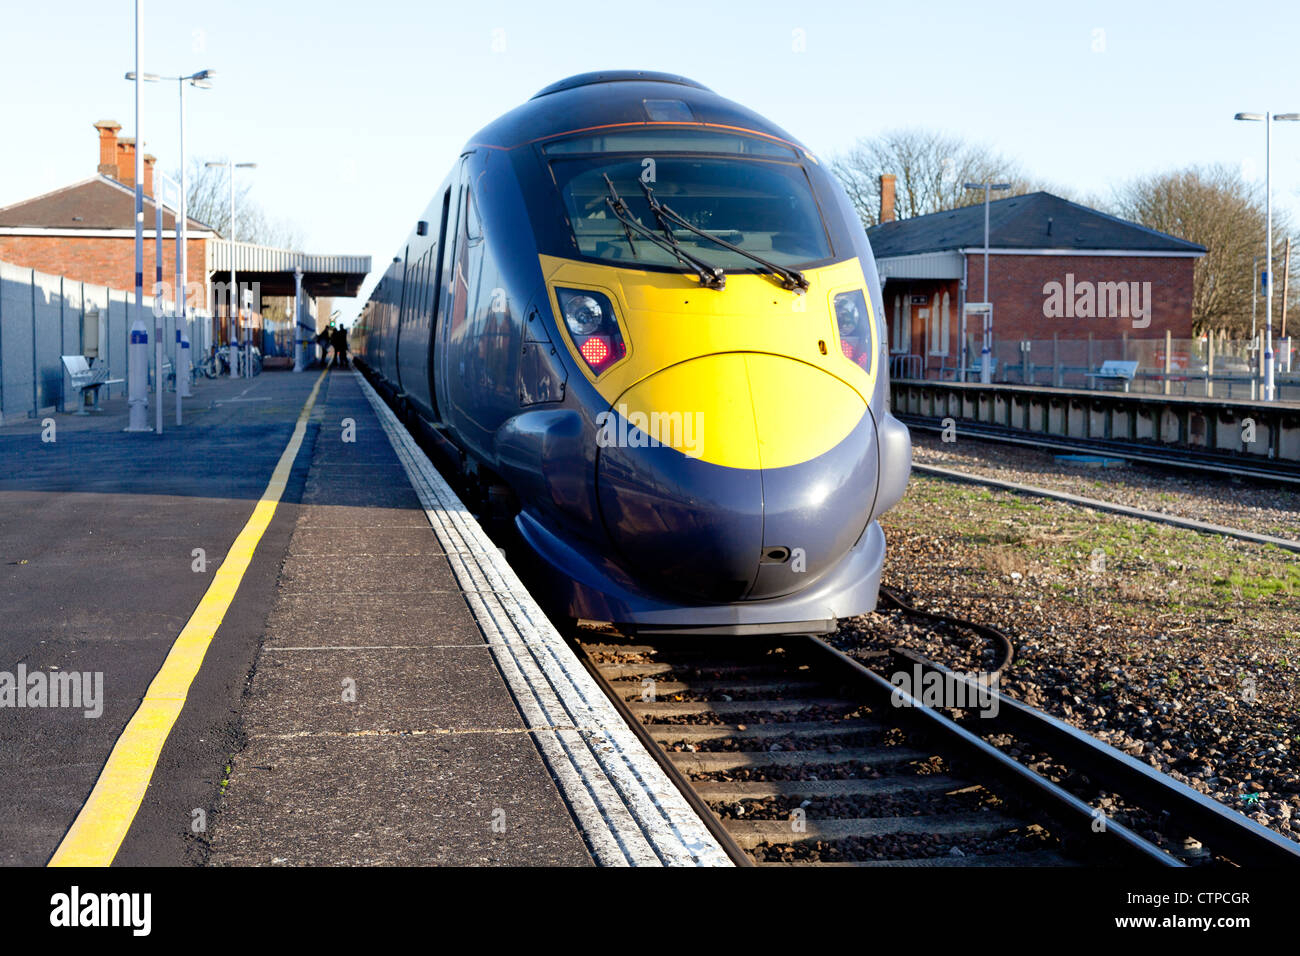 A high speed electric train stopped at a railway station Stock Photo